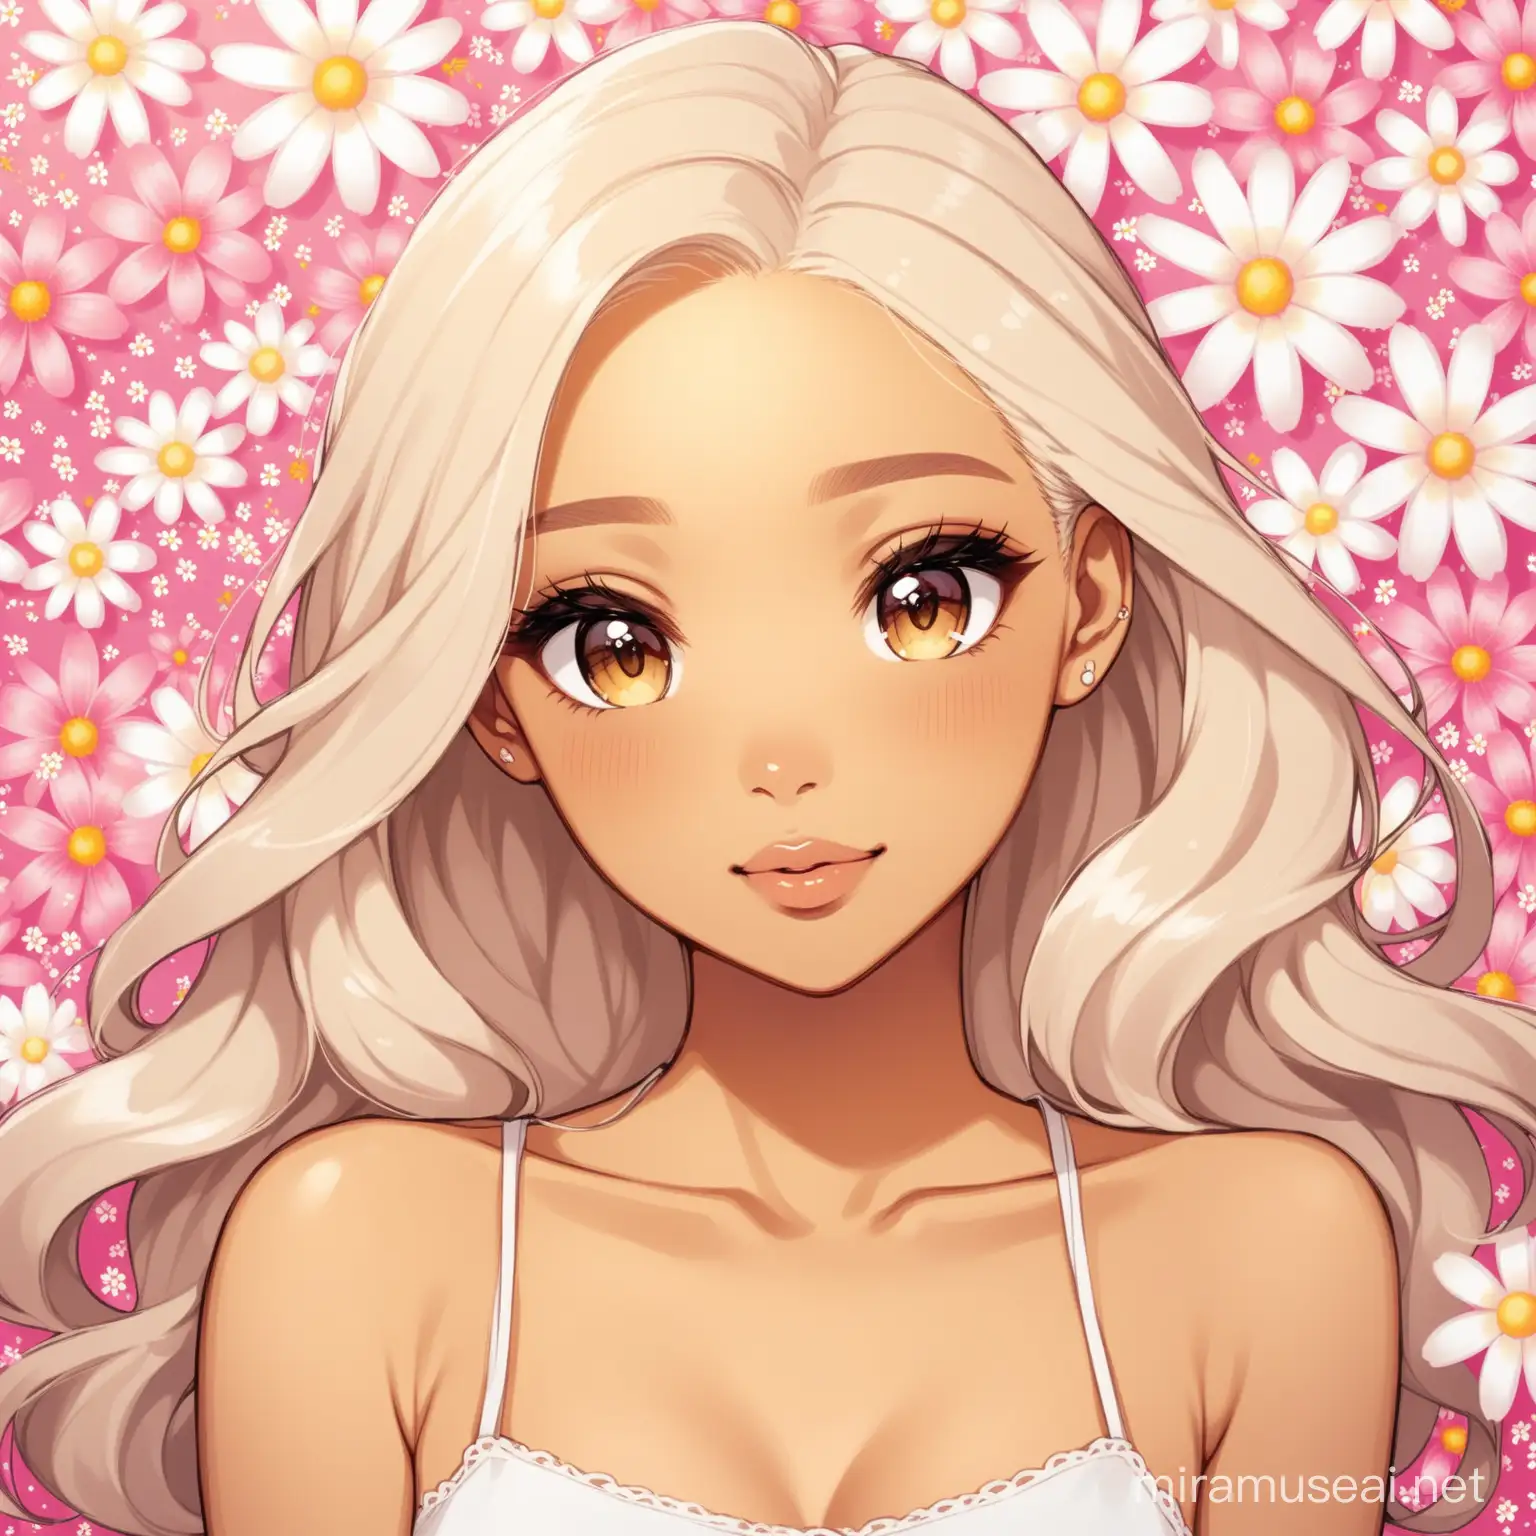 Beautiful Light Skin Girl Surrounded by Flower Blossoms